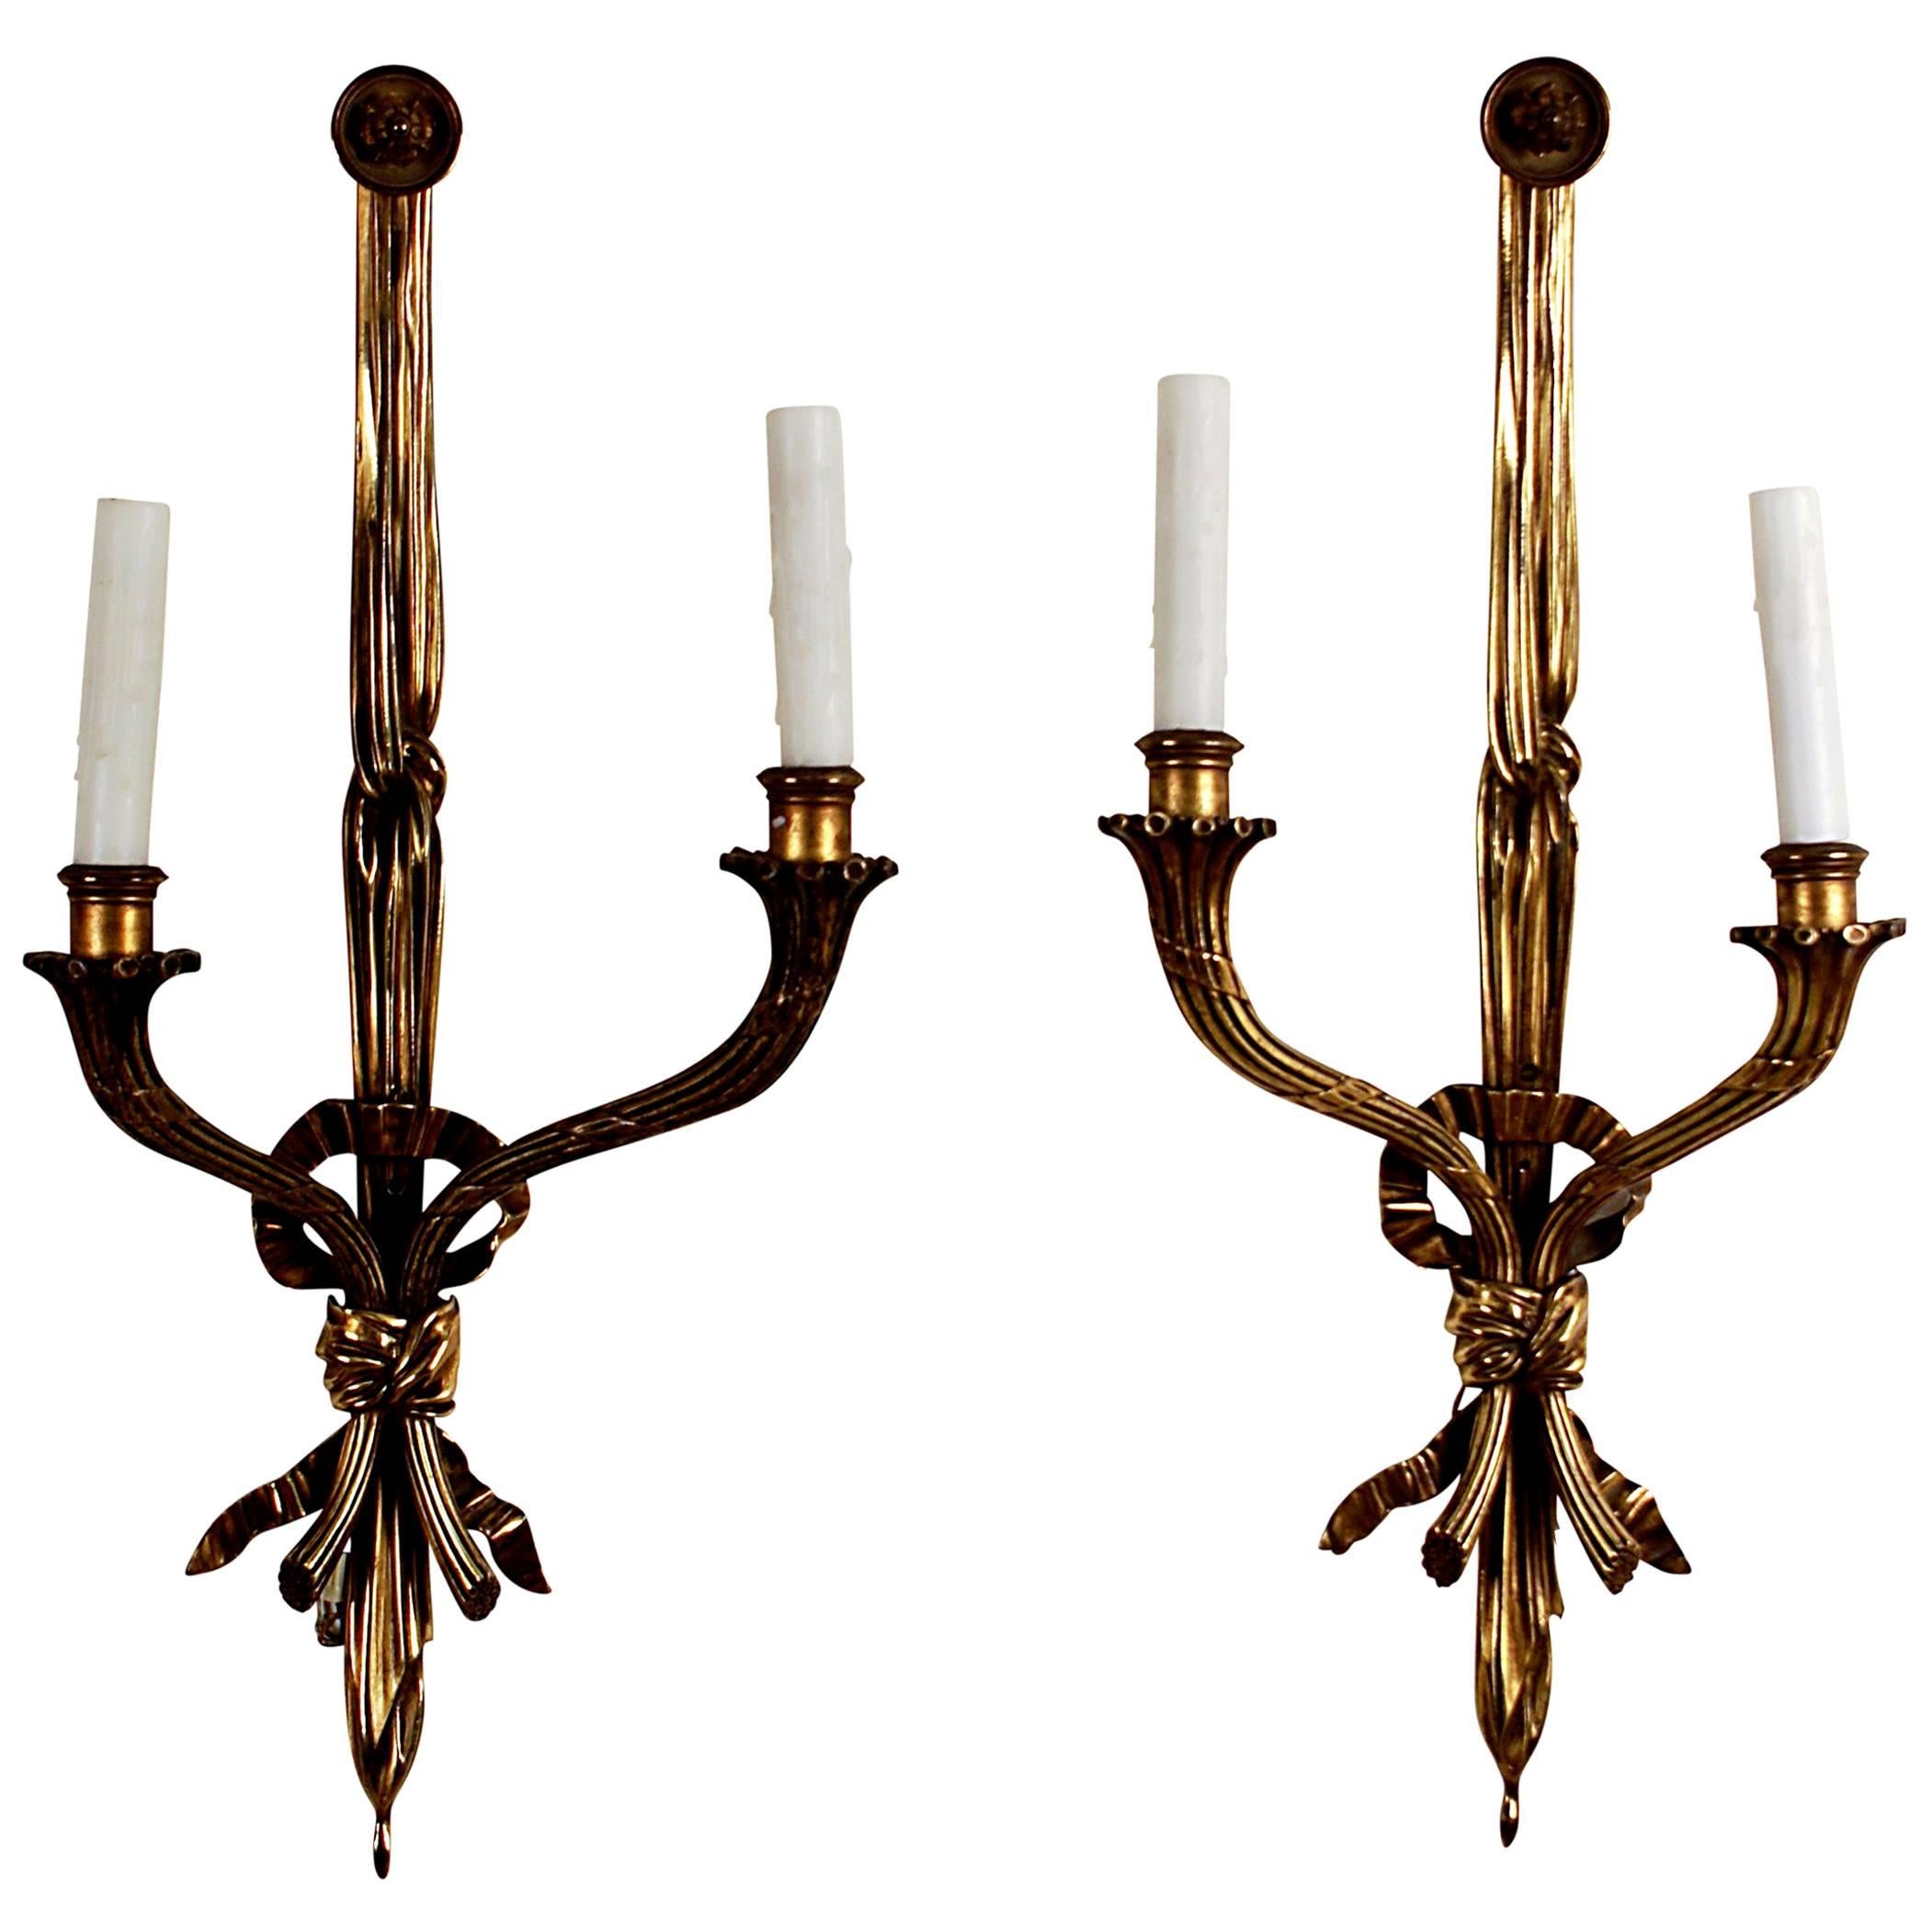 French Louis XVI Style Gilt Bronze Sconces Wired for Lighting, circa 1870